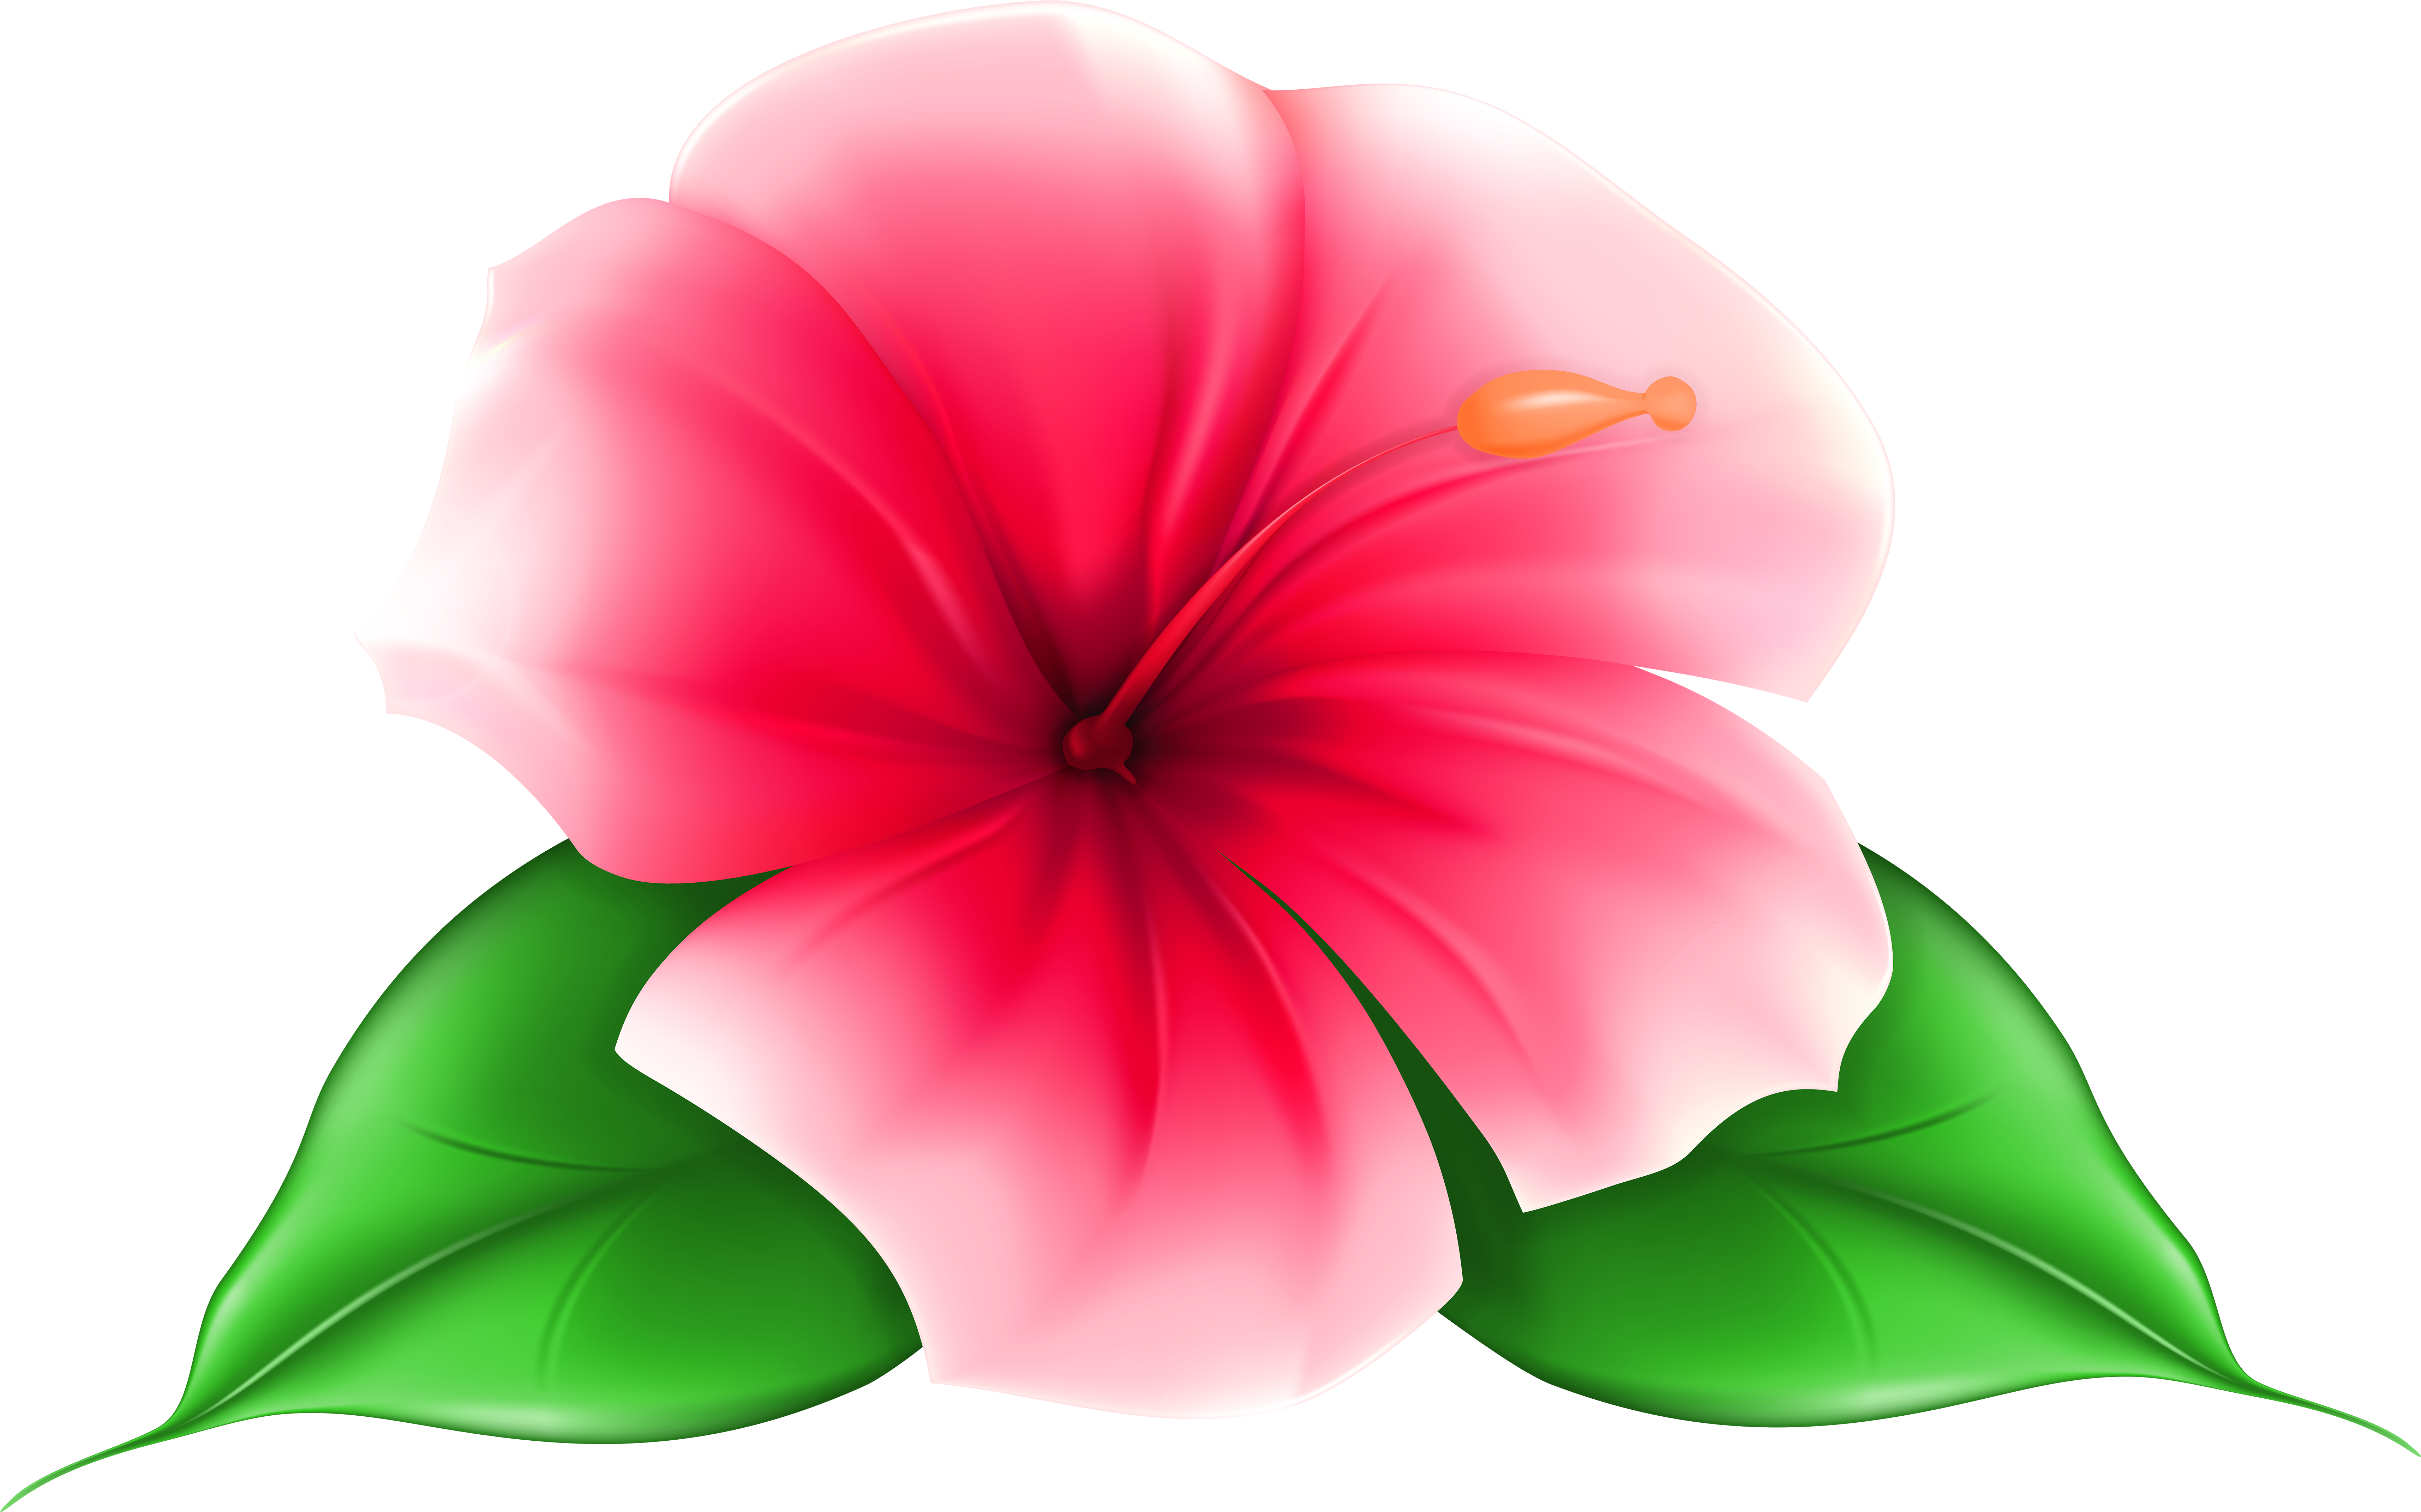 A Pink Flower With Green Leaves